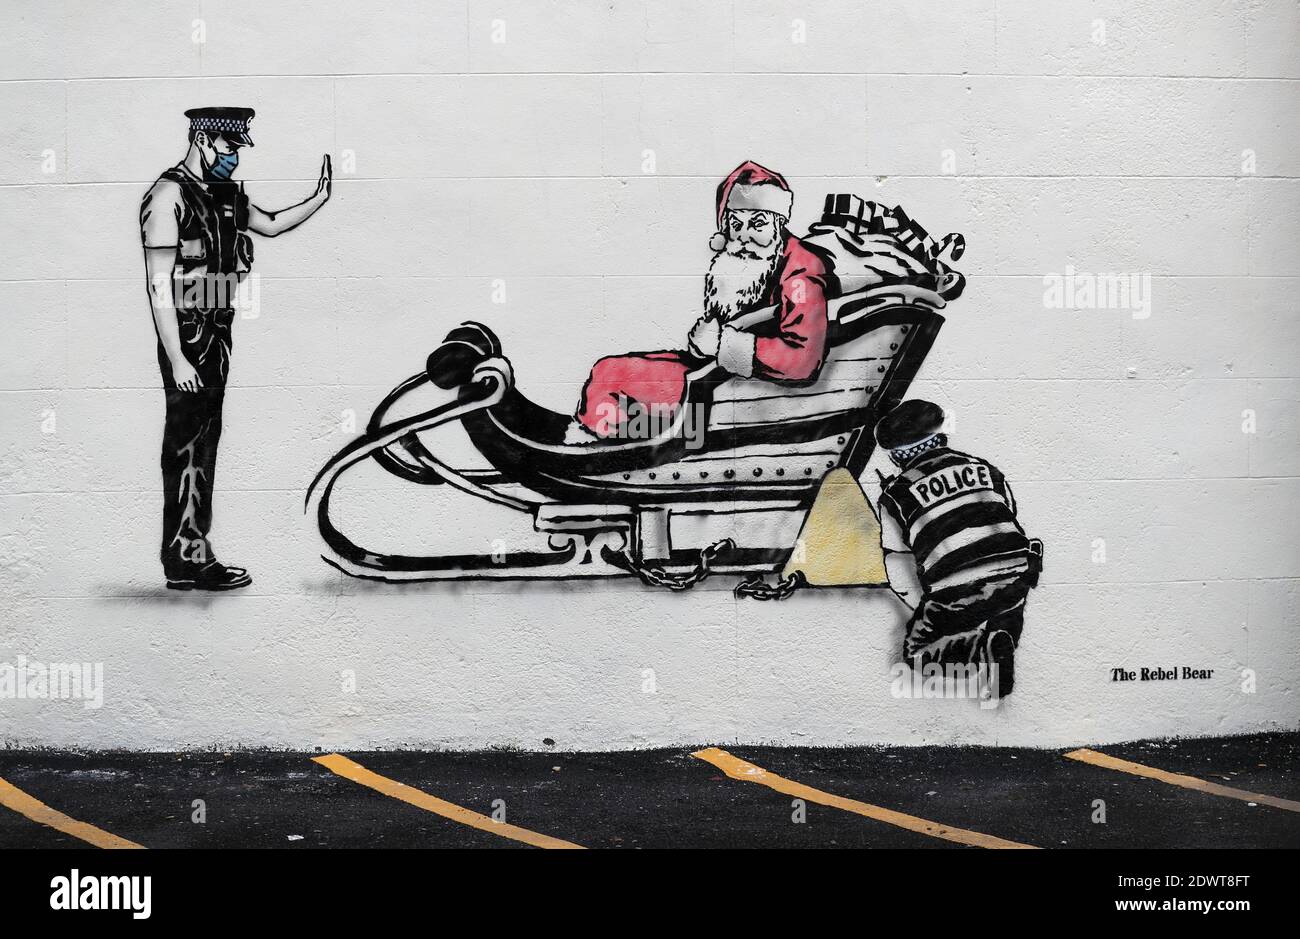 New artwork created by street artist The Rebel Bear near Leith Walk, Edinburgh, which features Santa Claus on his sleigh with his sleigh being clamped by a police officer. Stock Photo